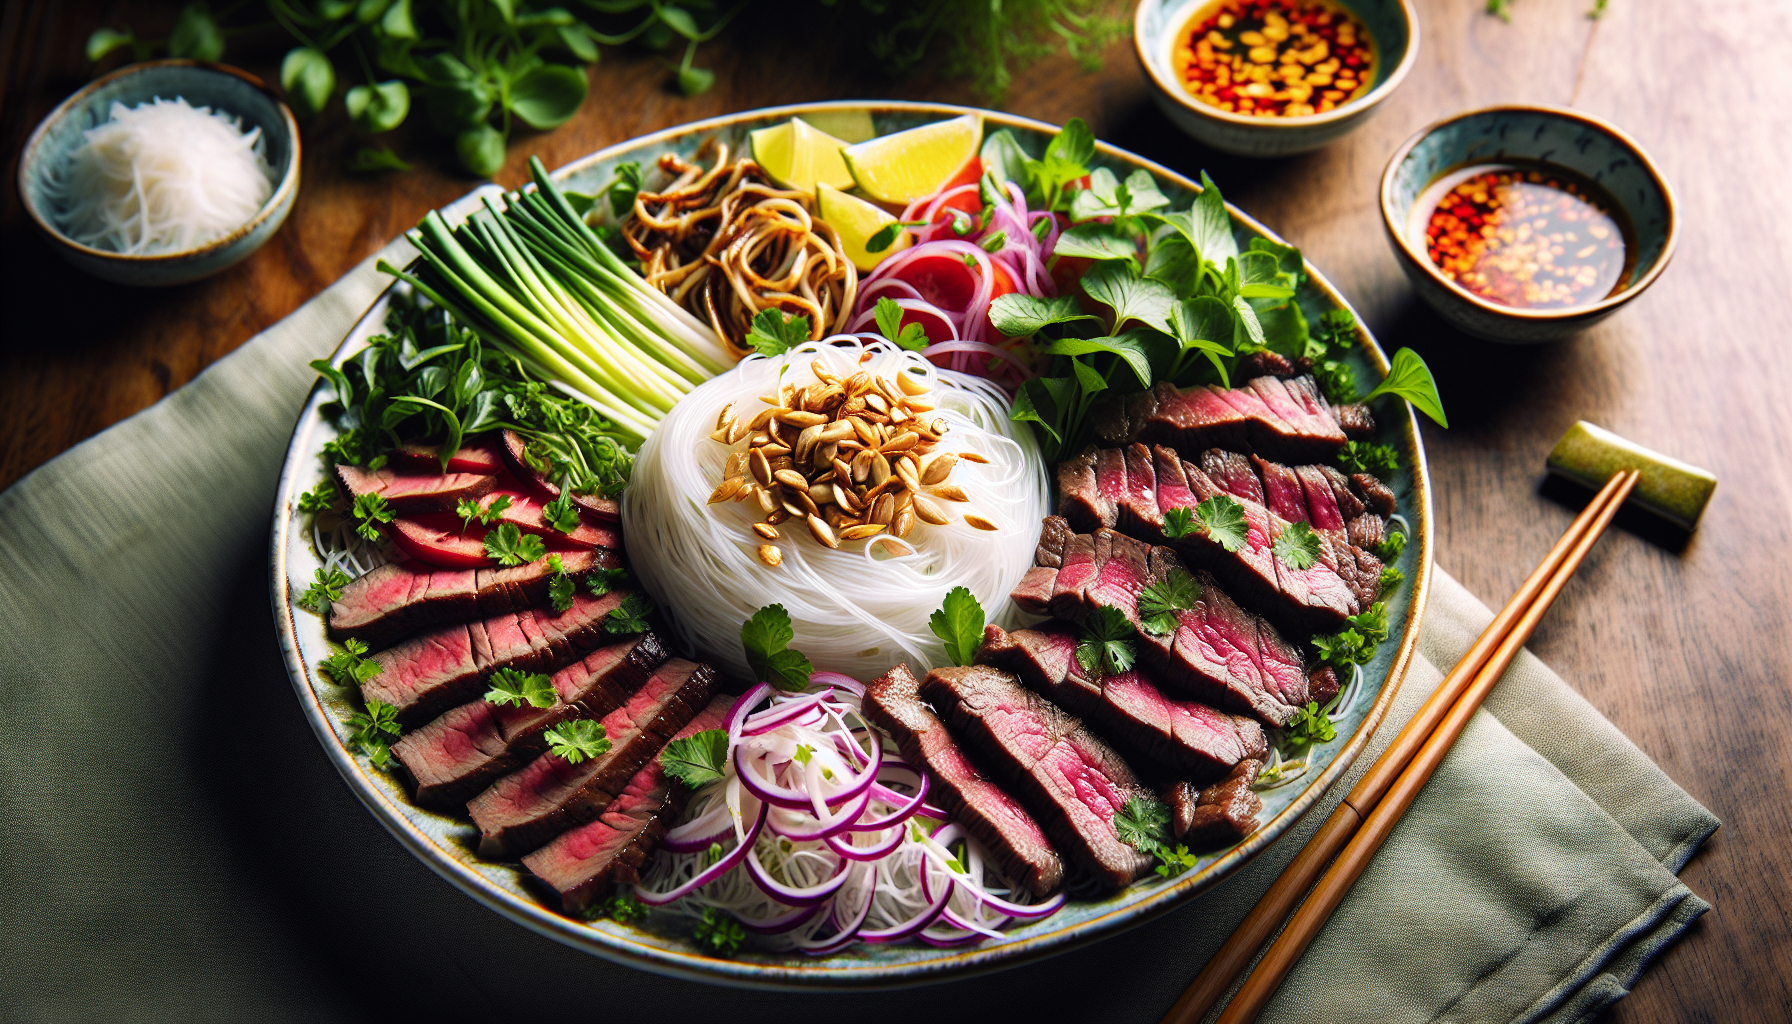 Whats Your Quick And Easy Vietnamese Recipe For A Delicious Dinner?